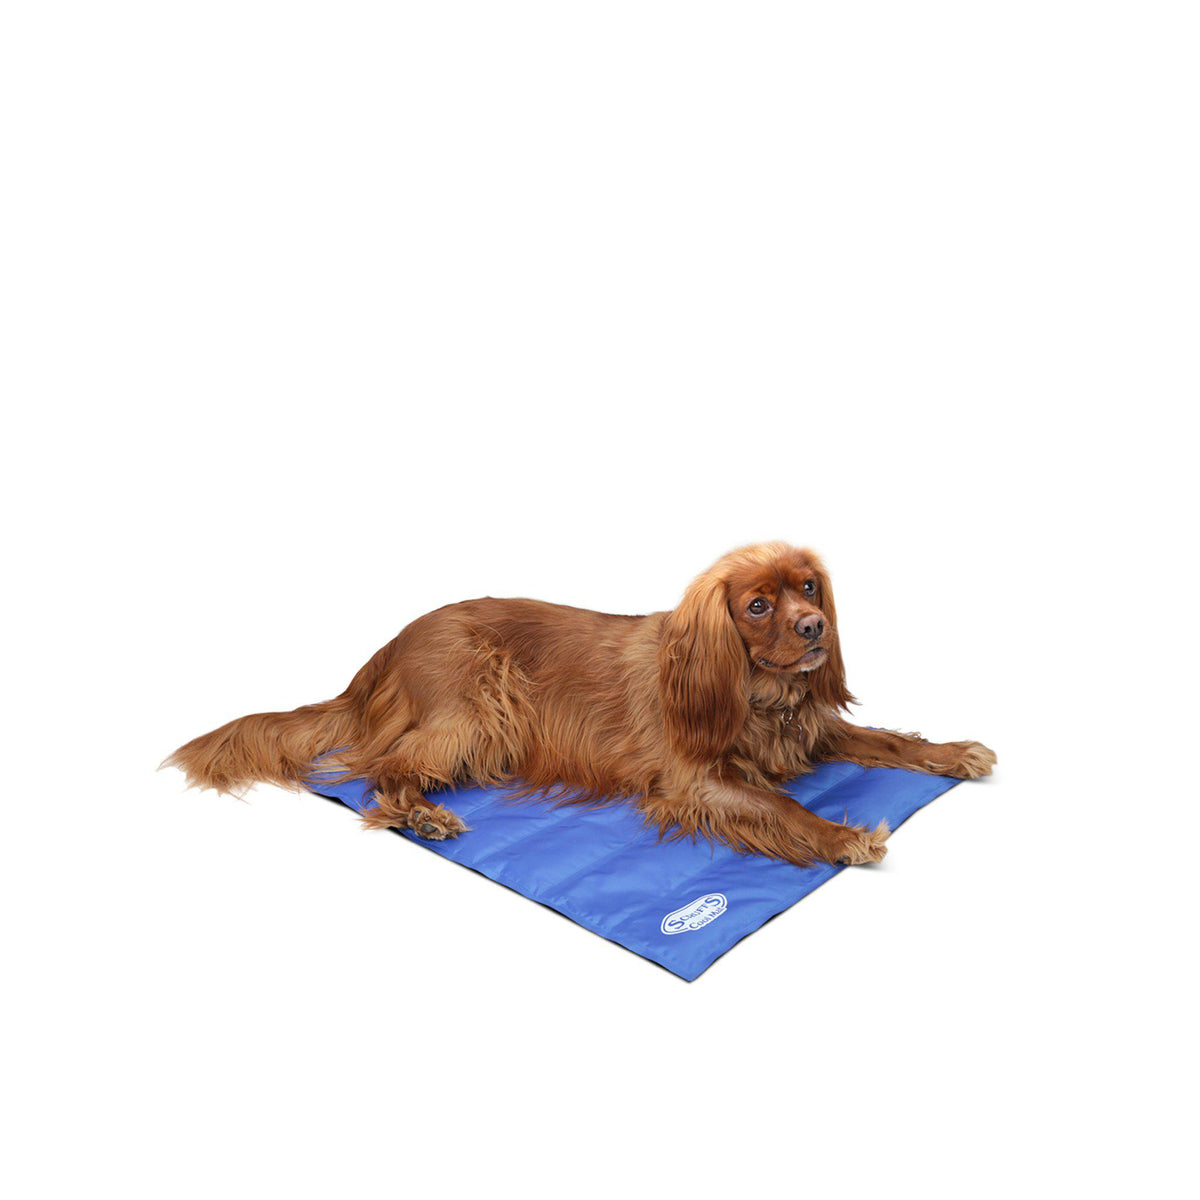 Cooling Mat - ComfyPet Products